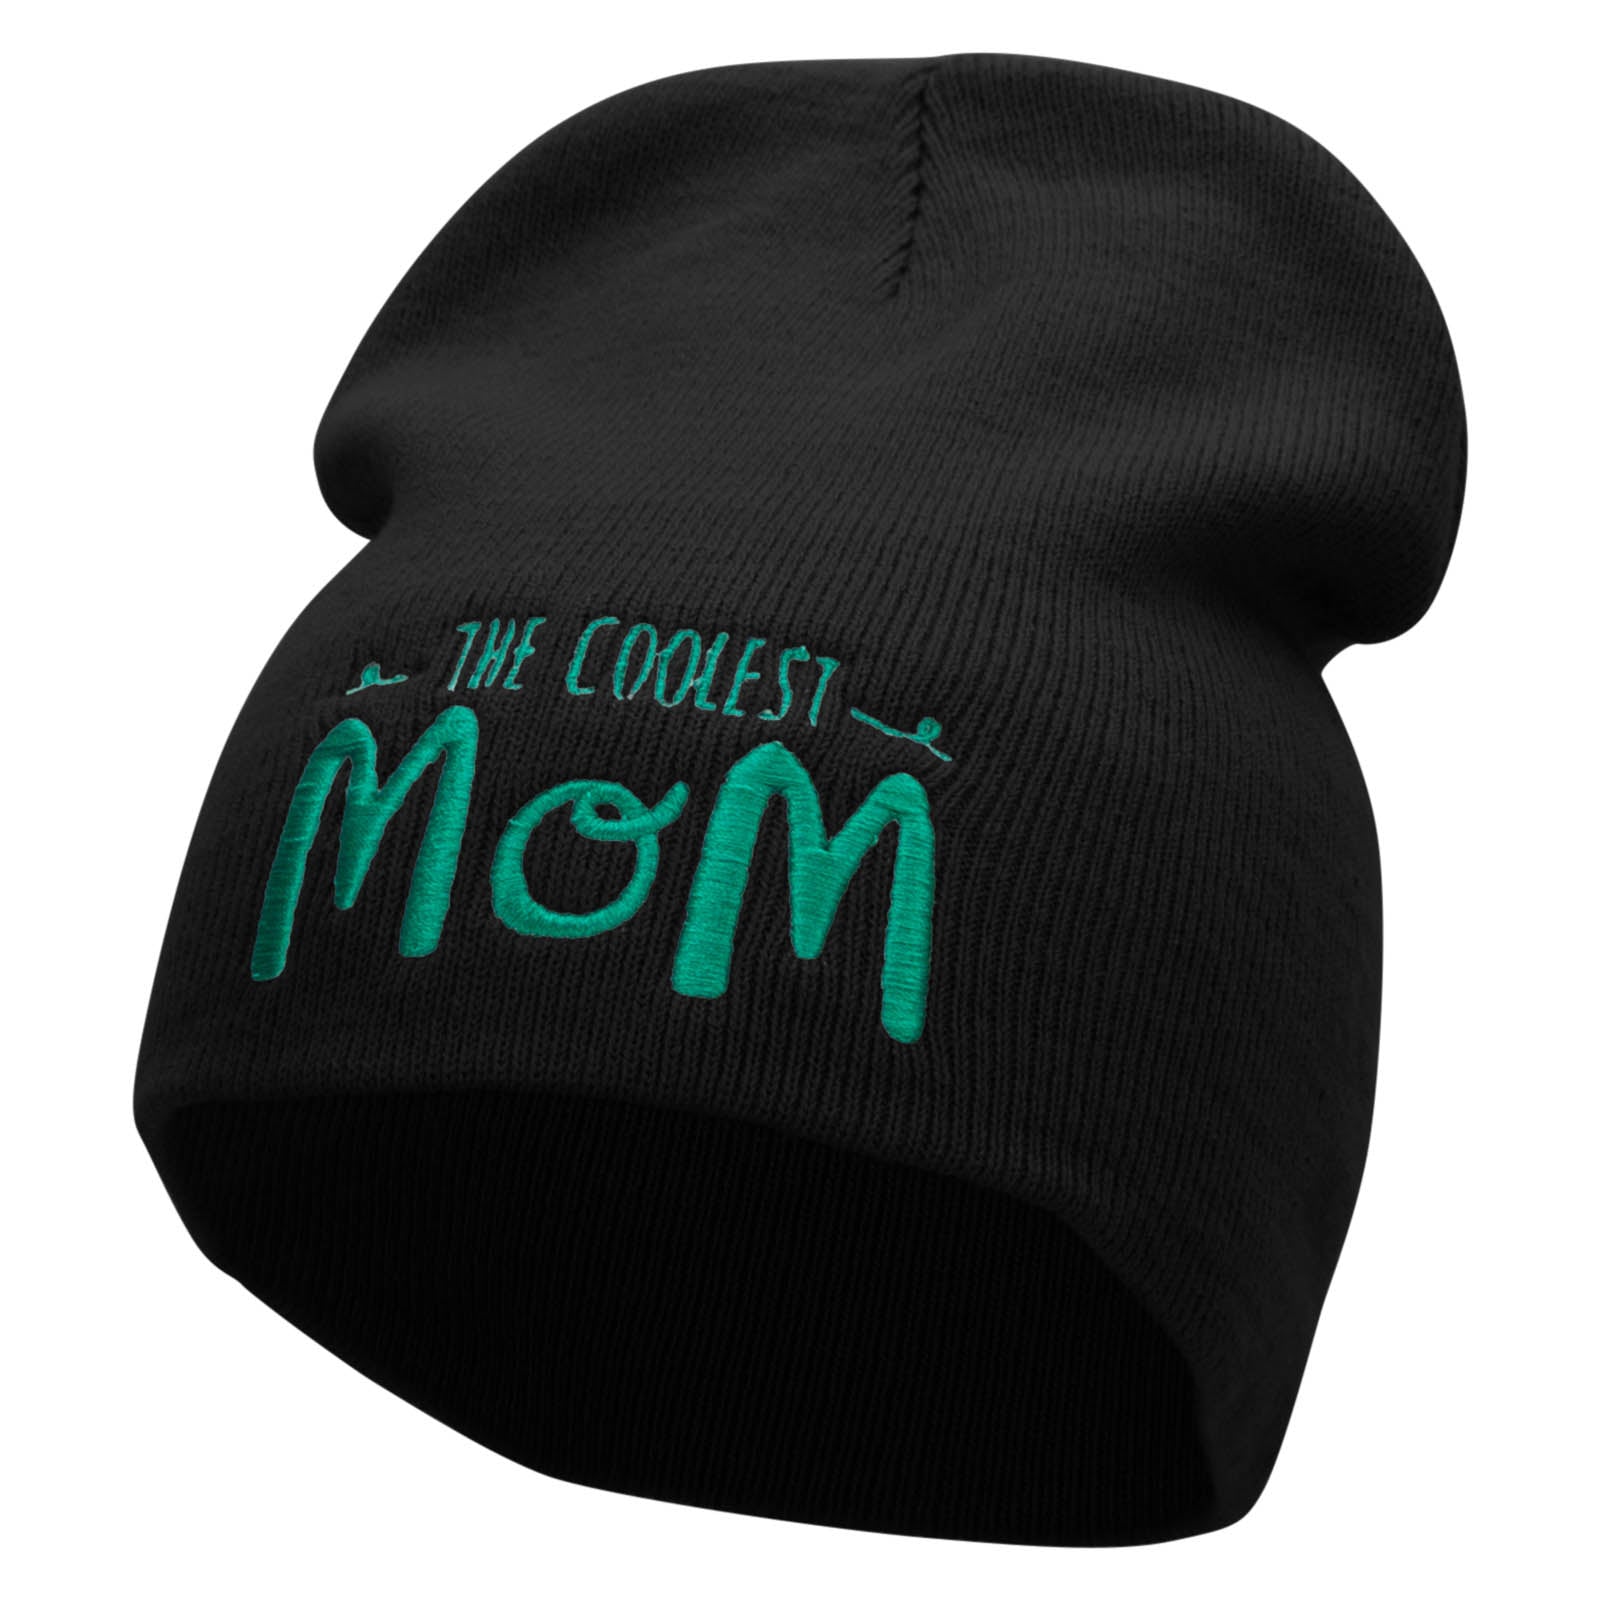 The Coolest Mom Embroidered 8 inch Acrylic Short Blank Beanie - Black OSFM